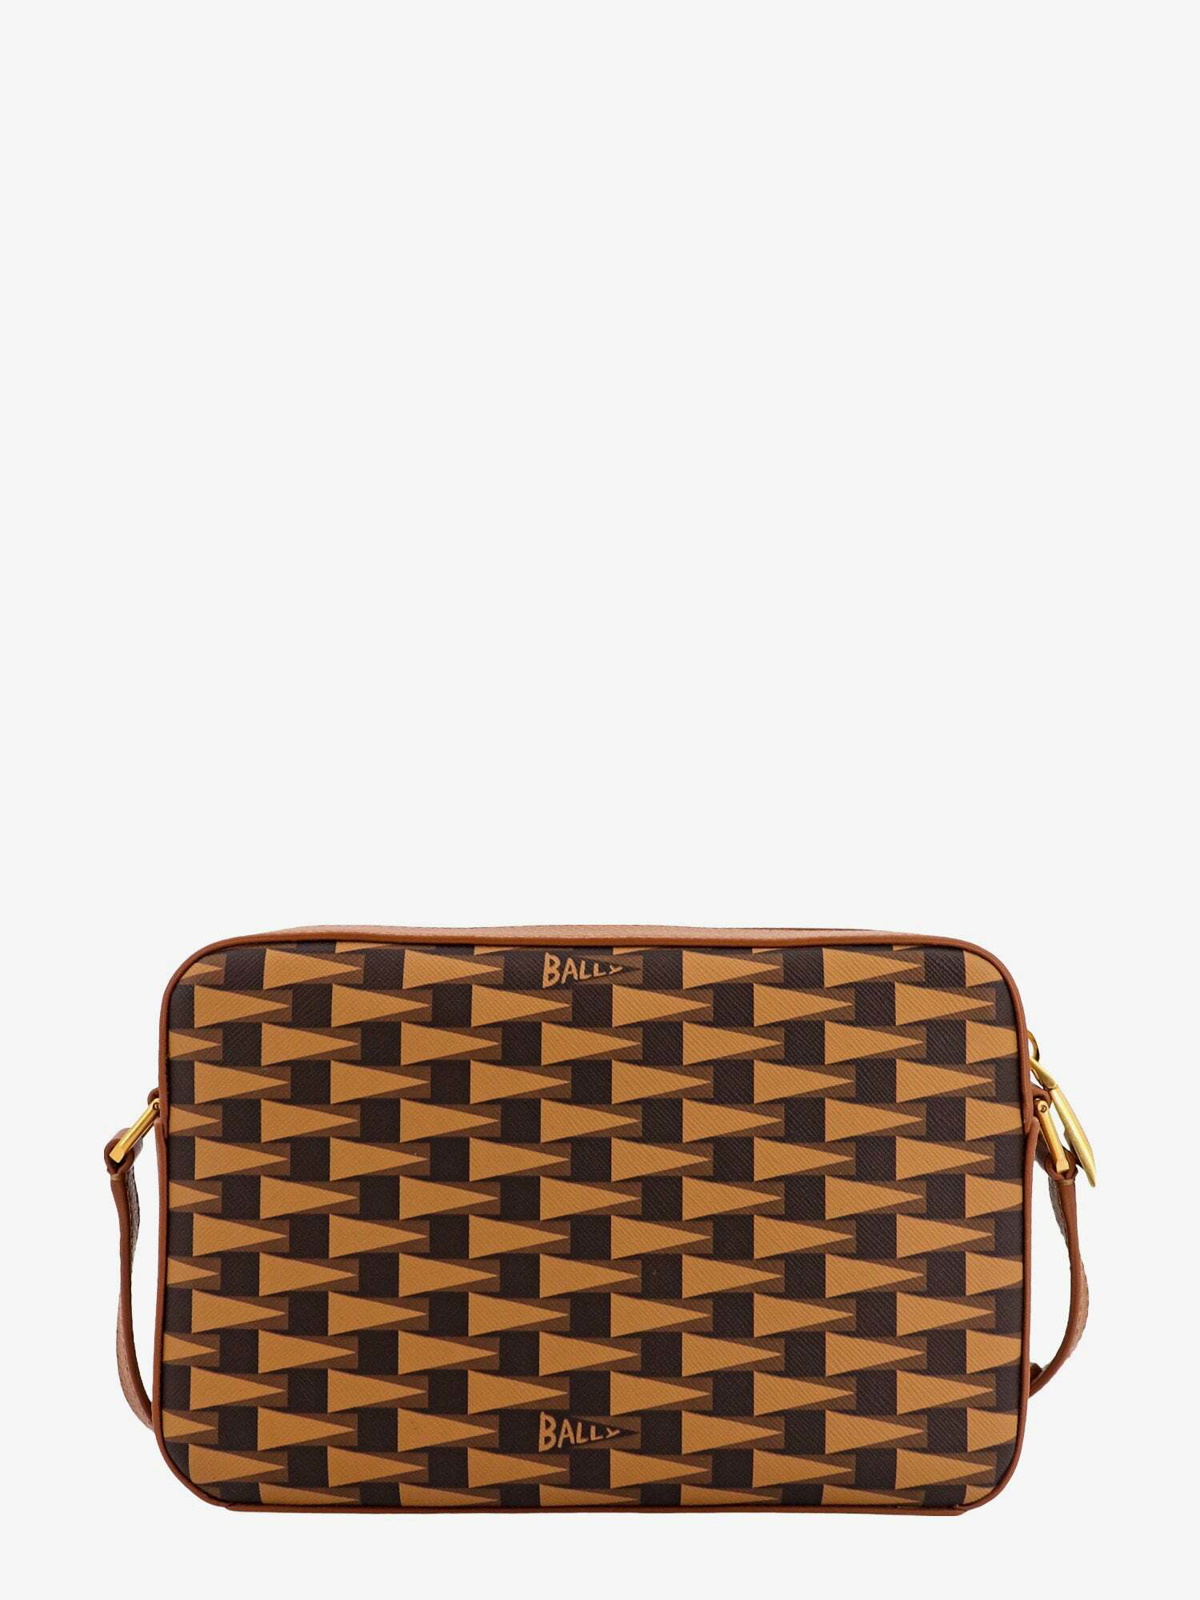 BALLY Clutch Bags Bally Leather For Female for Women